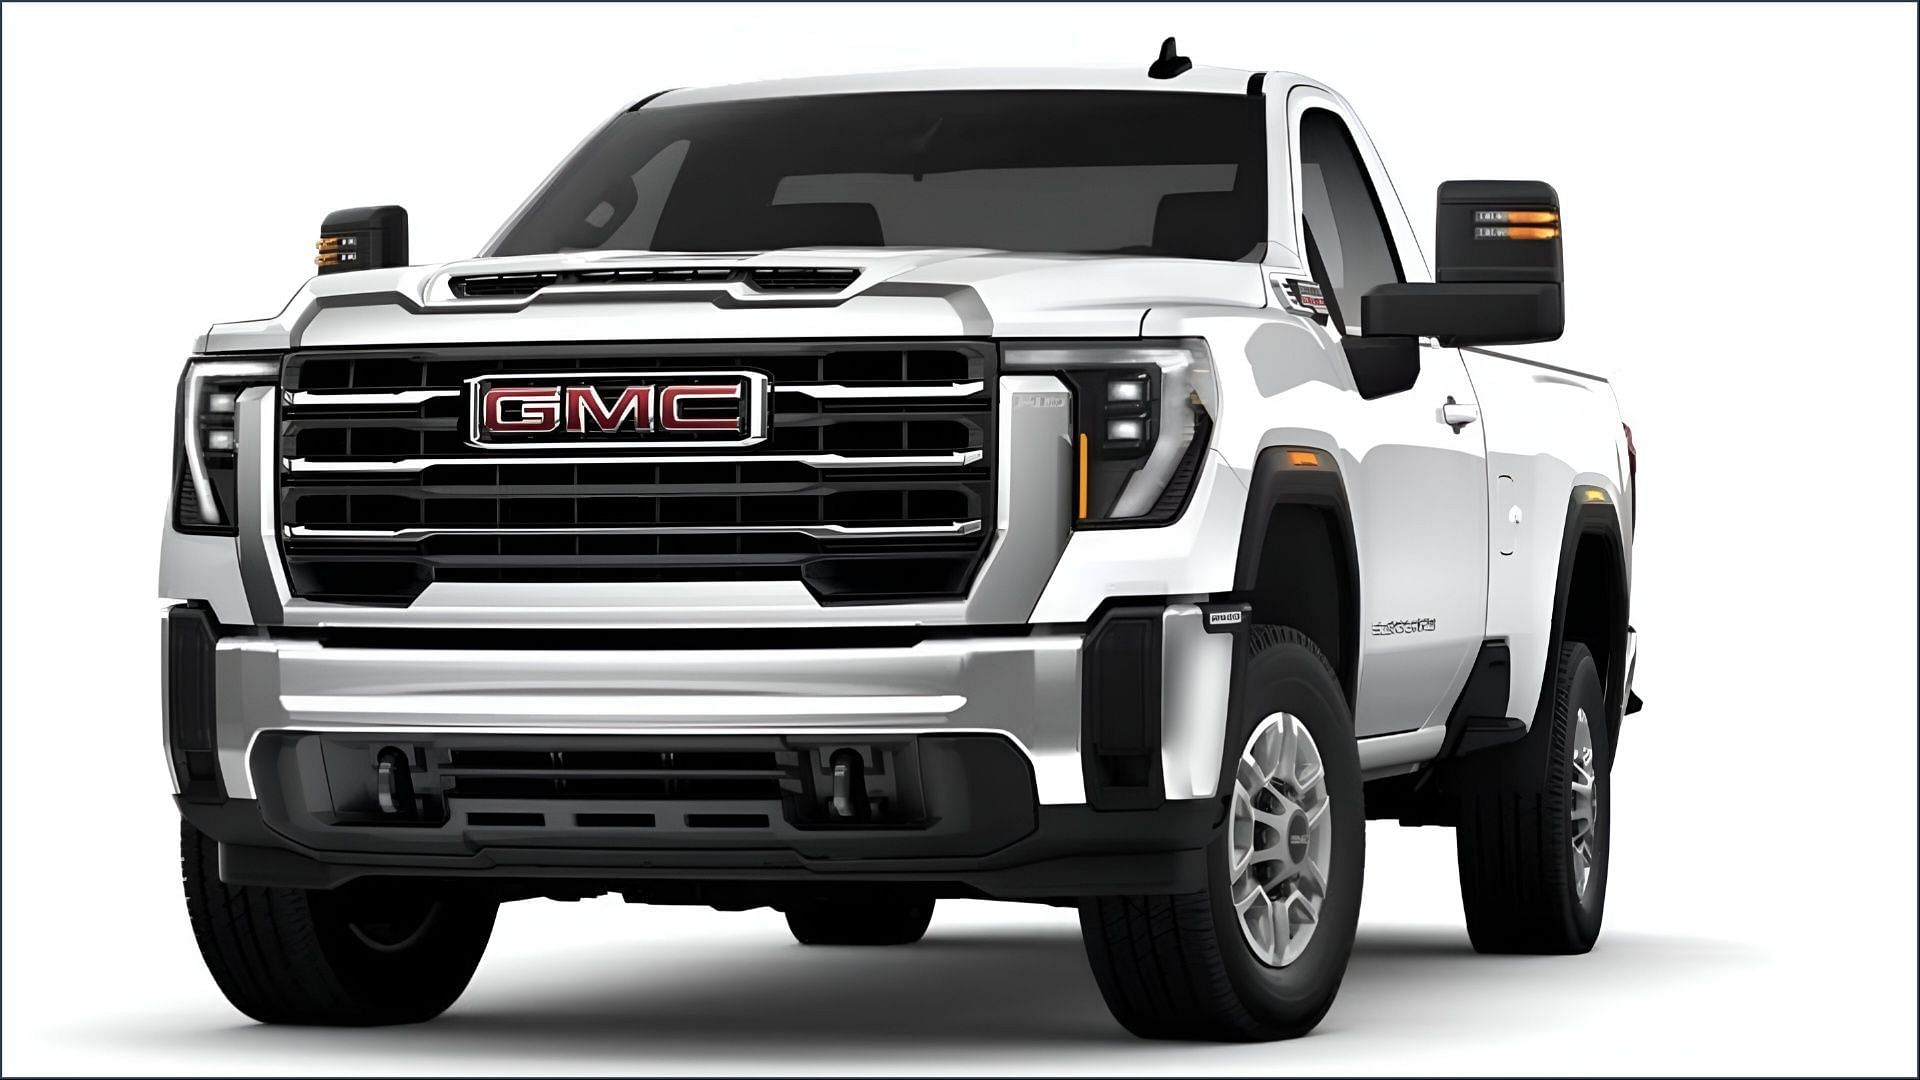 The recalled GMC Sierra and Chevy Silverado pick-up trucks may have an issue with the tailgate (Image via General Motors)